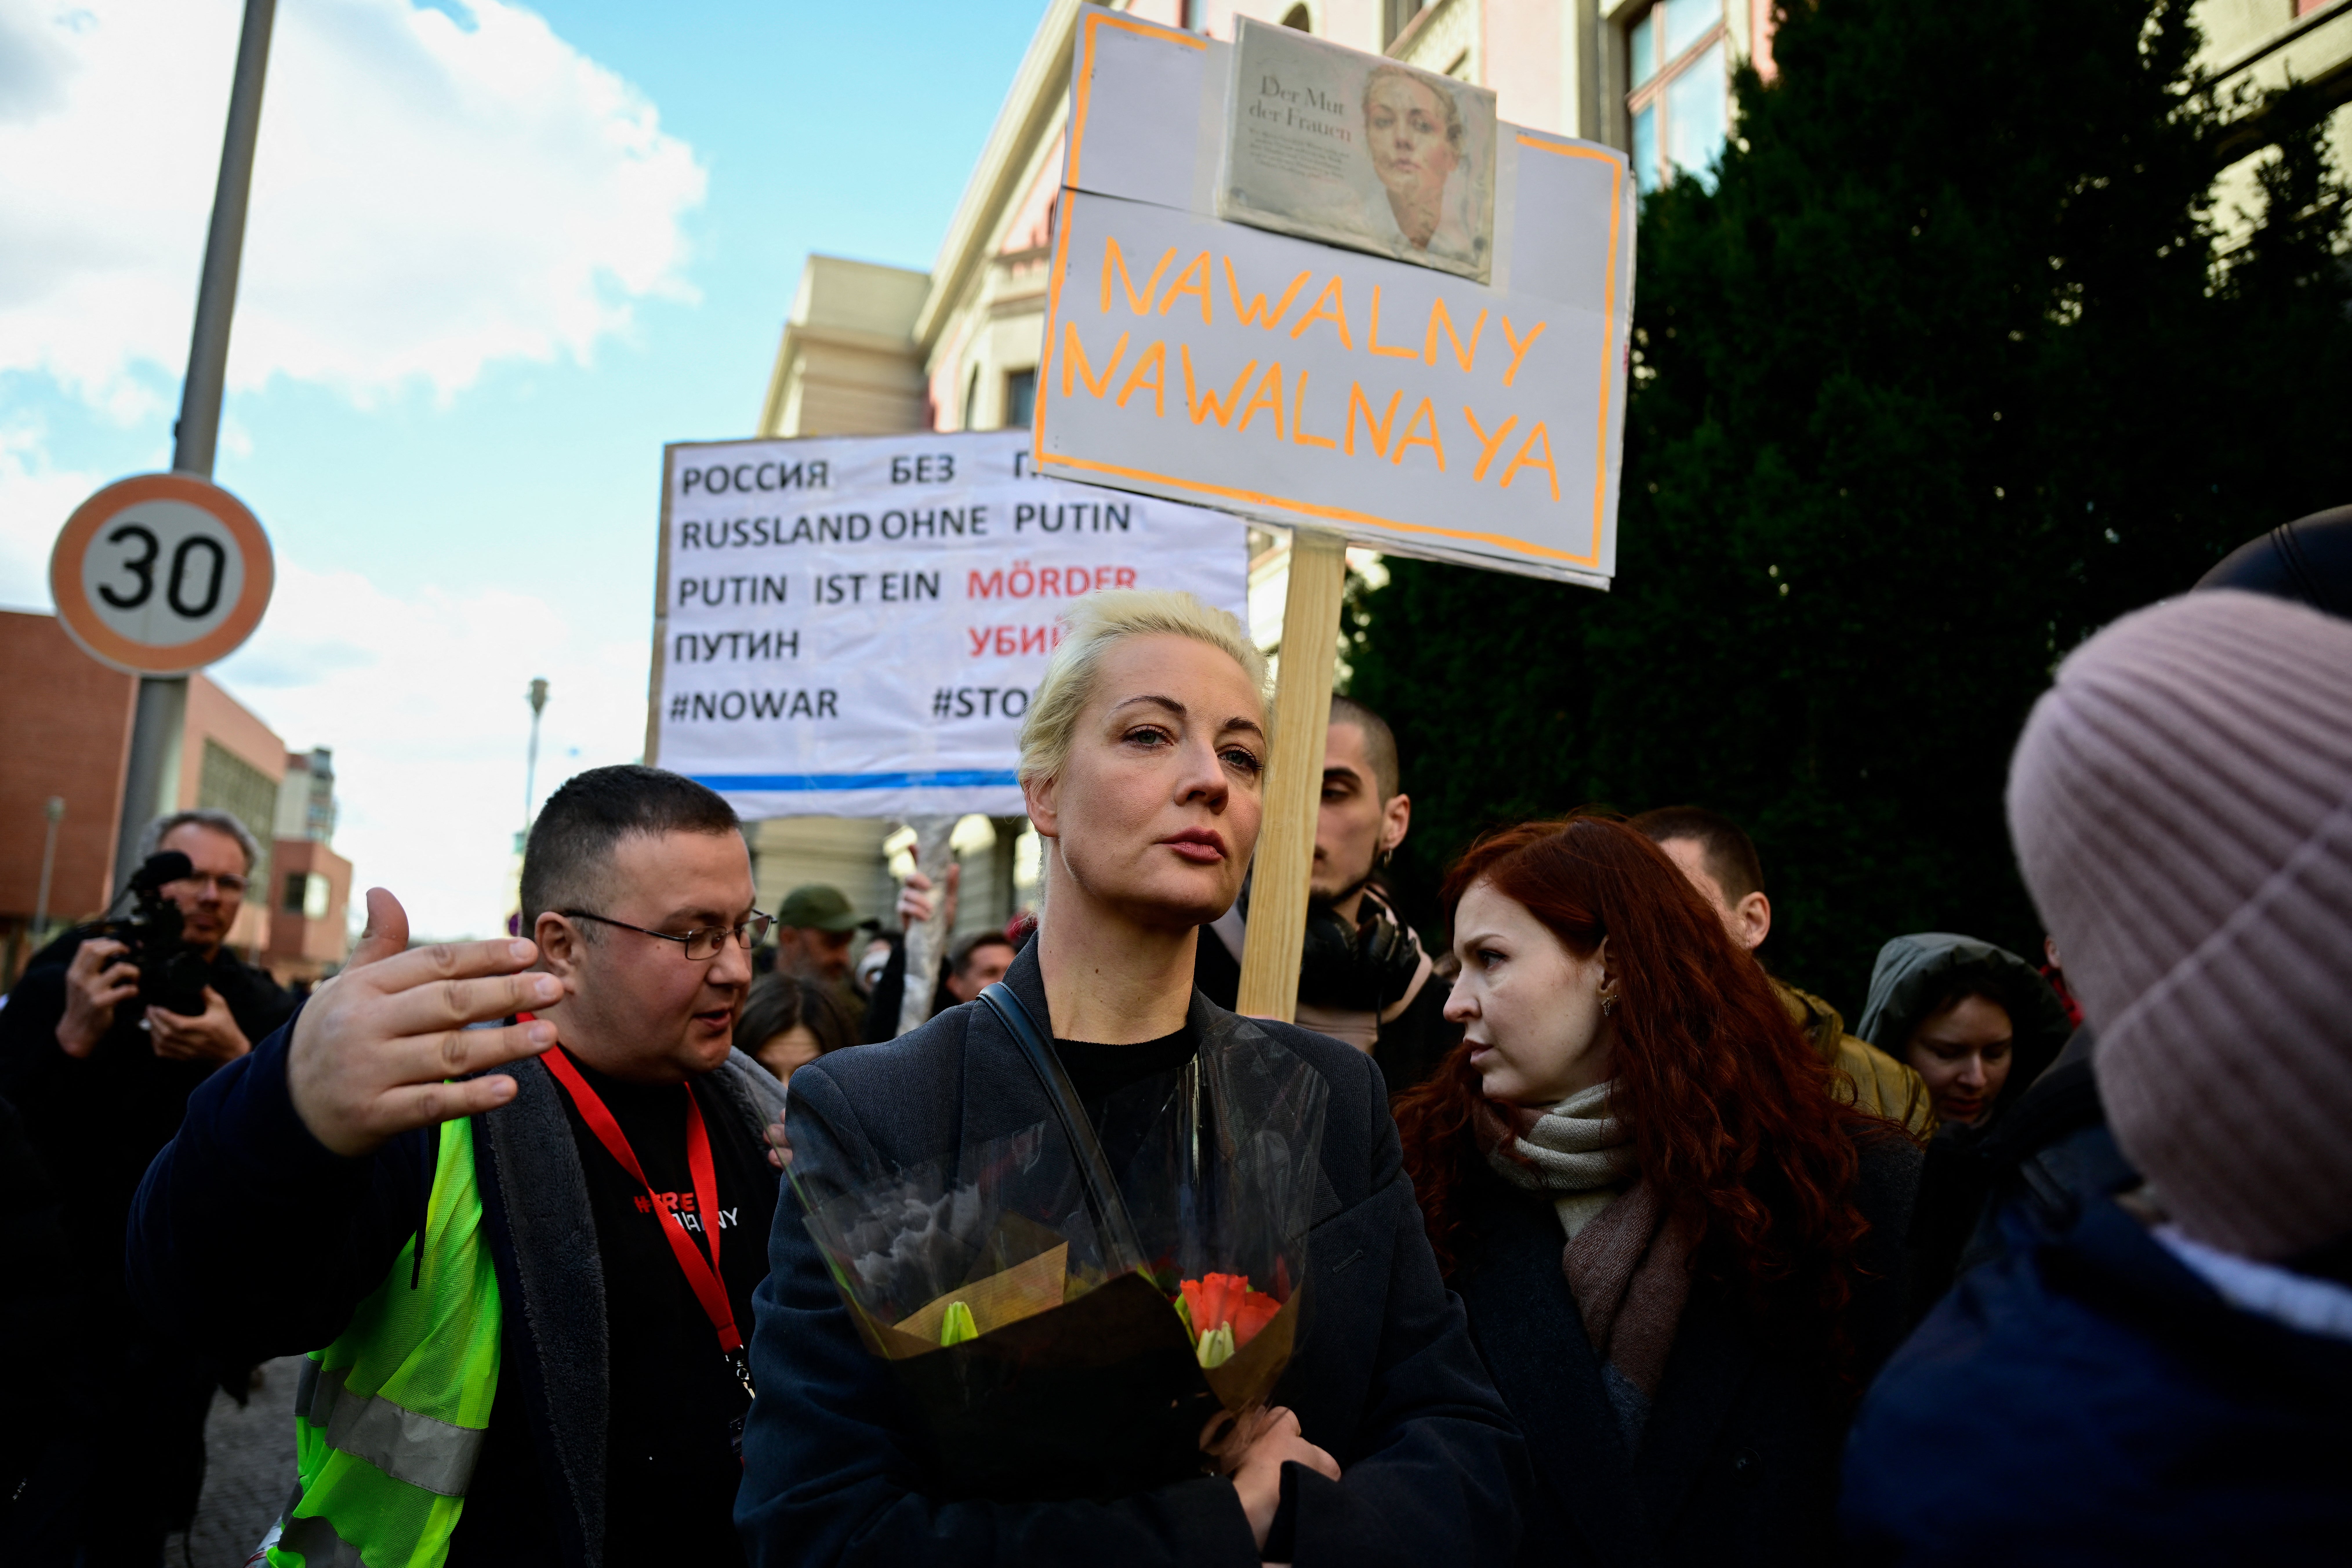 Yulia Navalnaya was present at a rally in Berlin on Sunday, her appearance there was a reminder of just how brave acts of defiance are